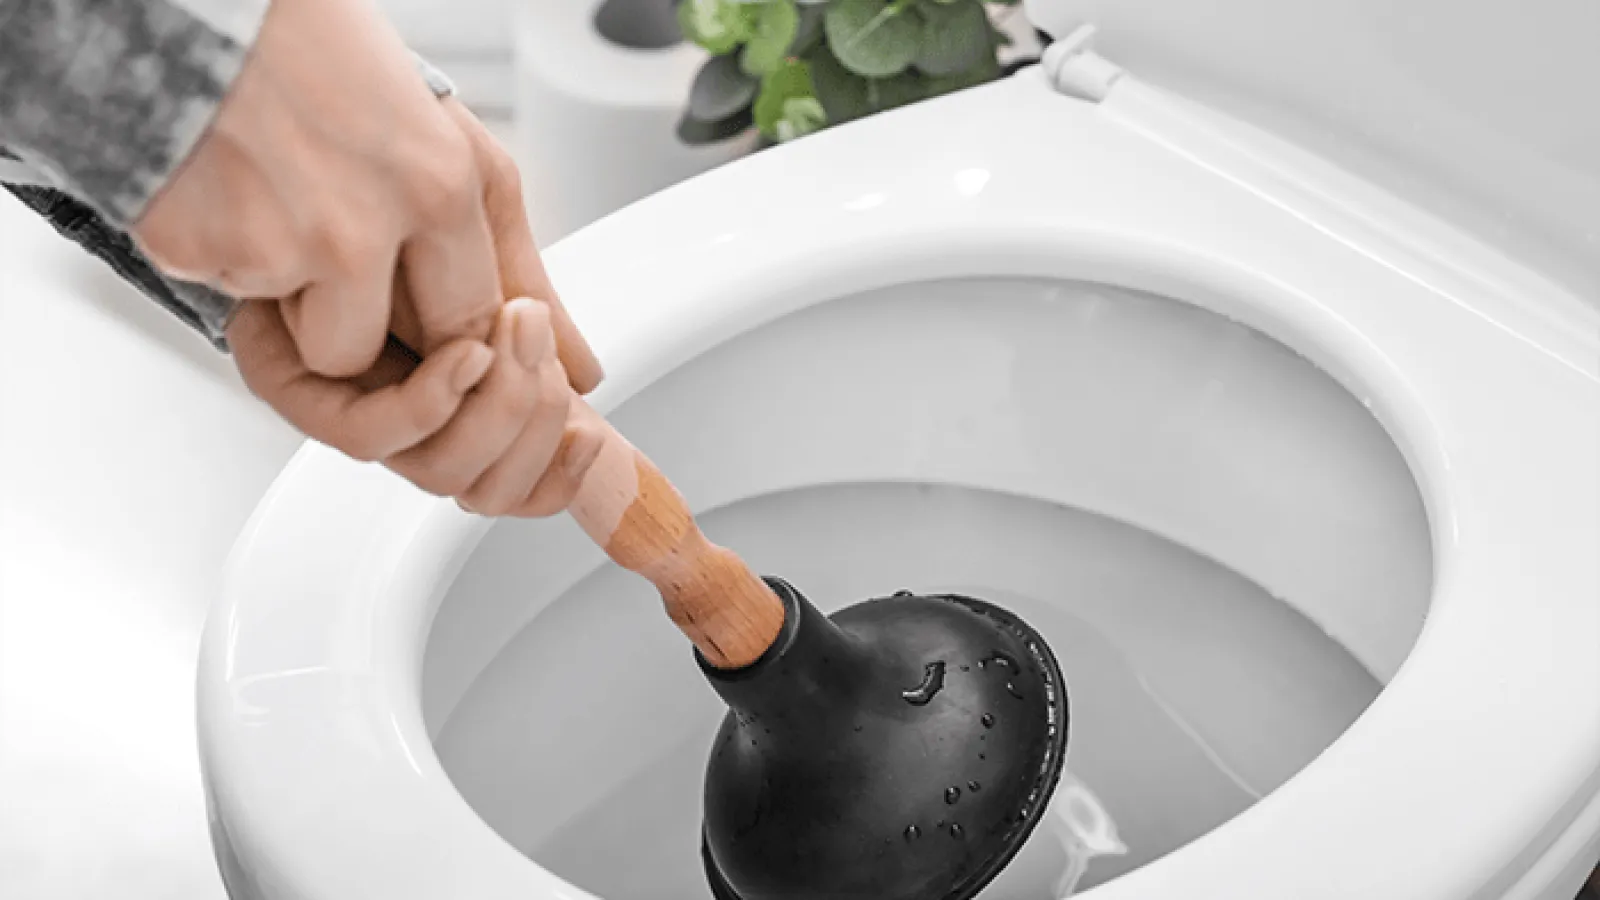 How to Unclog a Toilet Without a Plunger That Is Overflowing